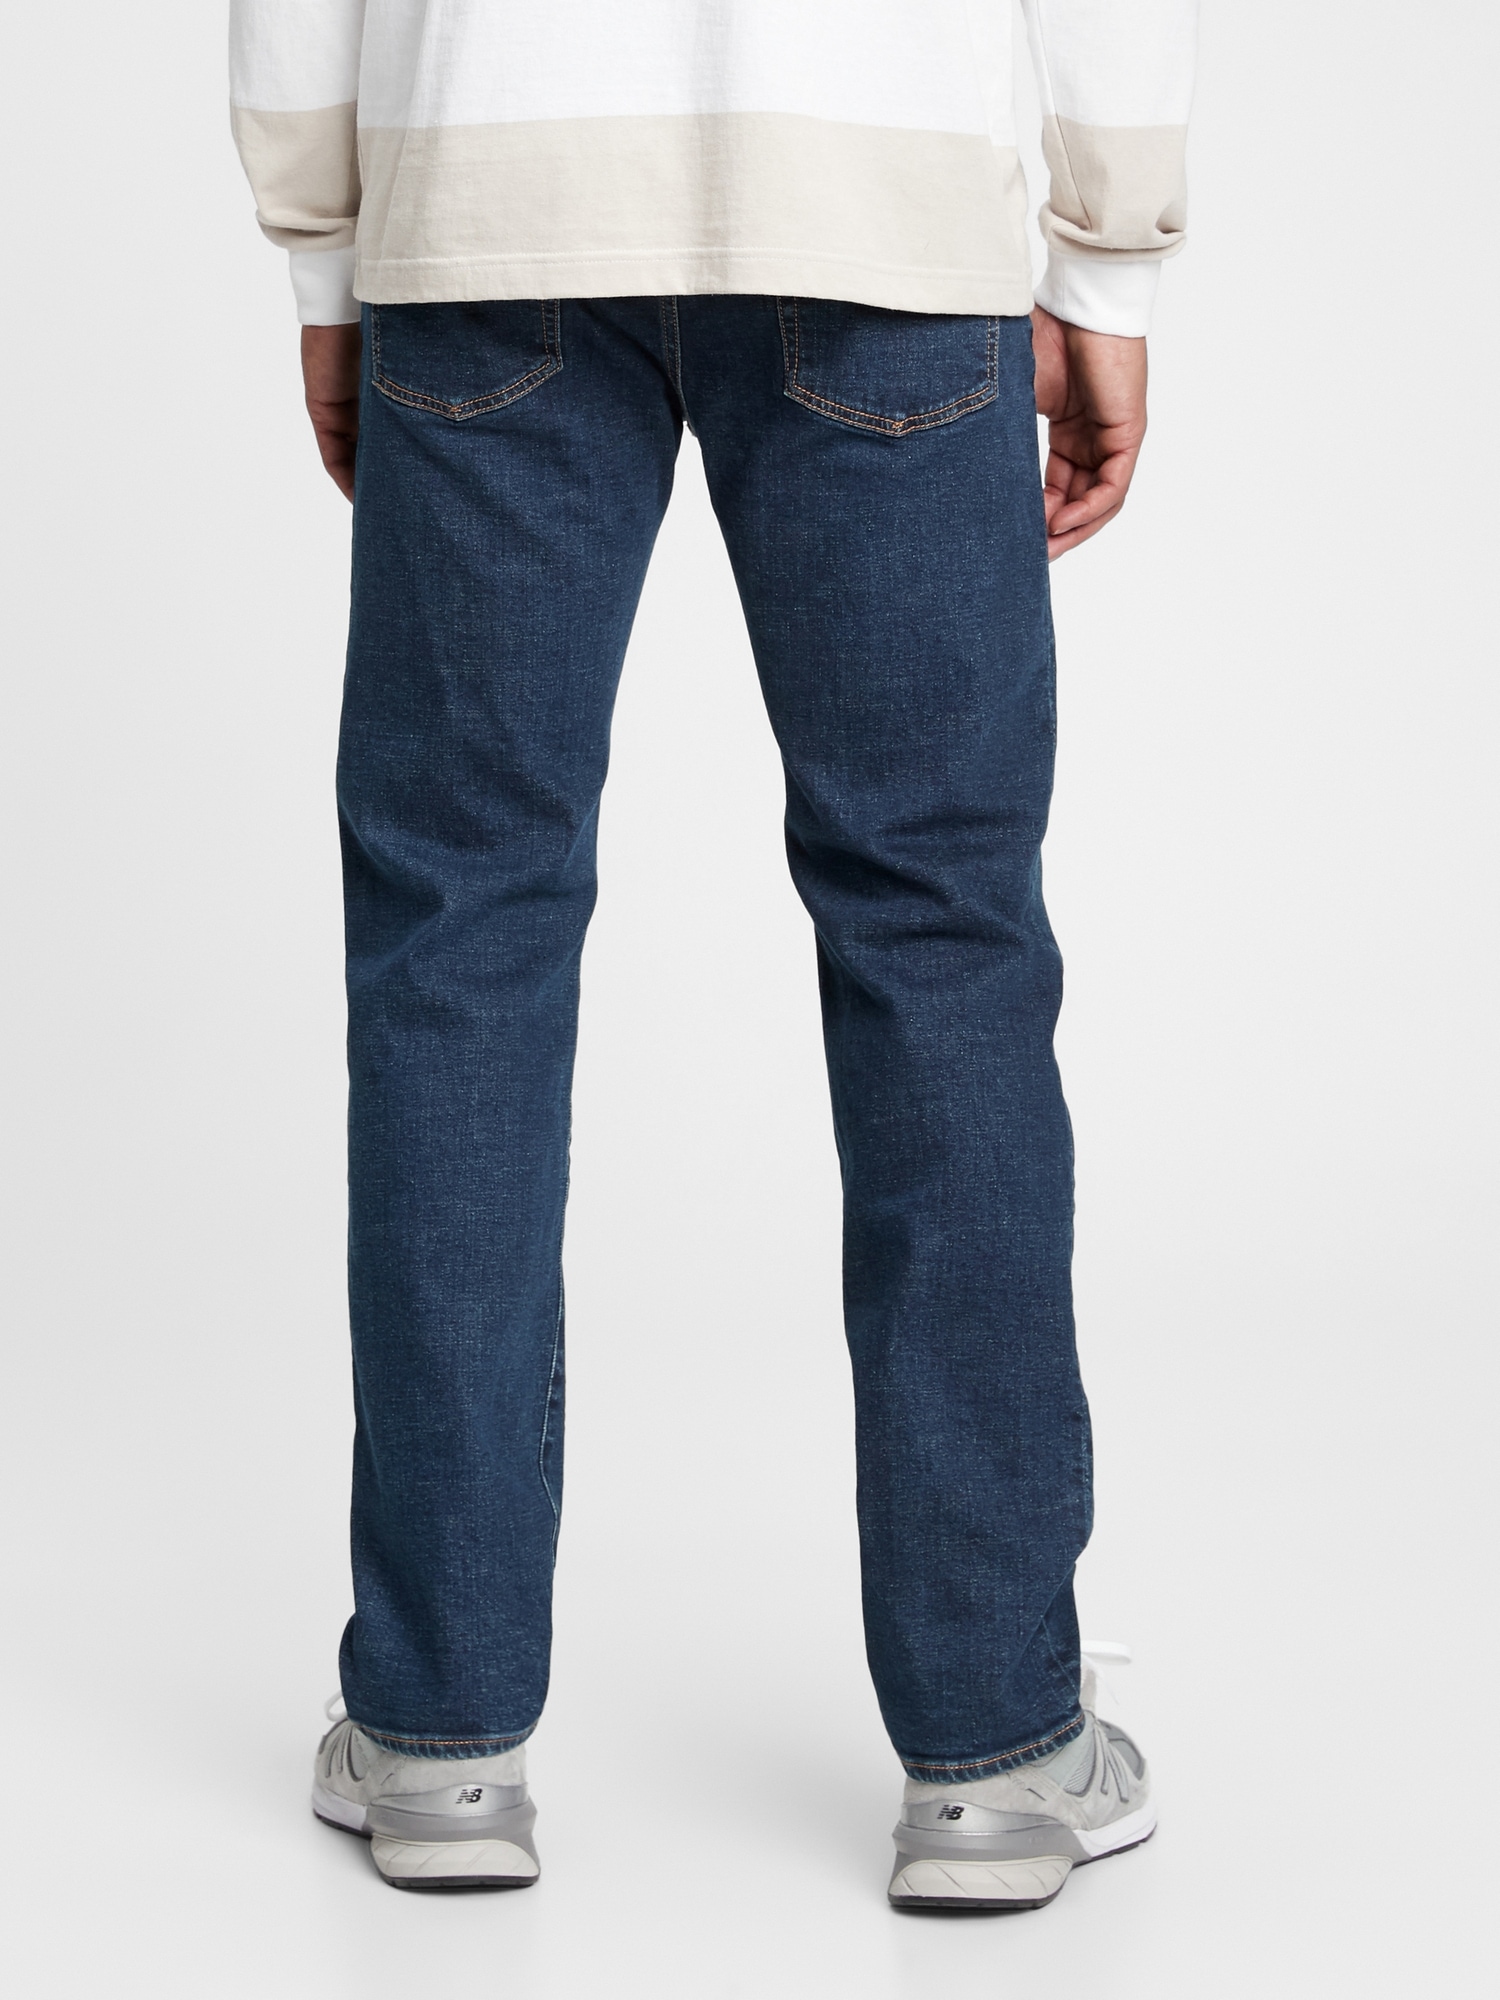 Gap  Straight fit jeans, Mens straight jeans, Jeans online